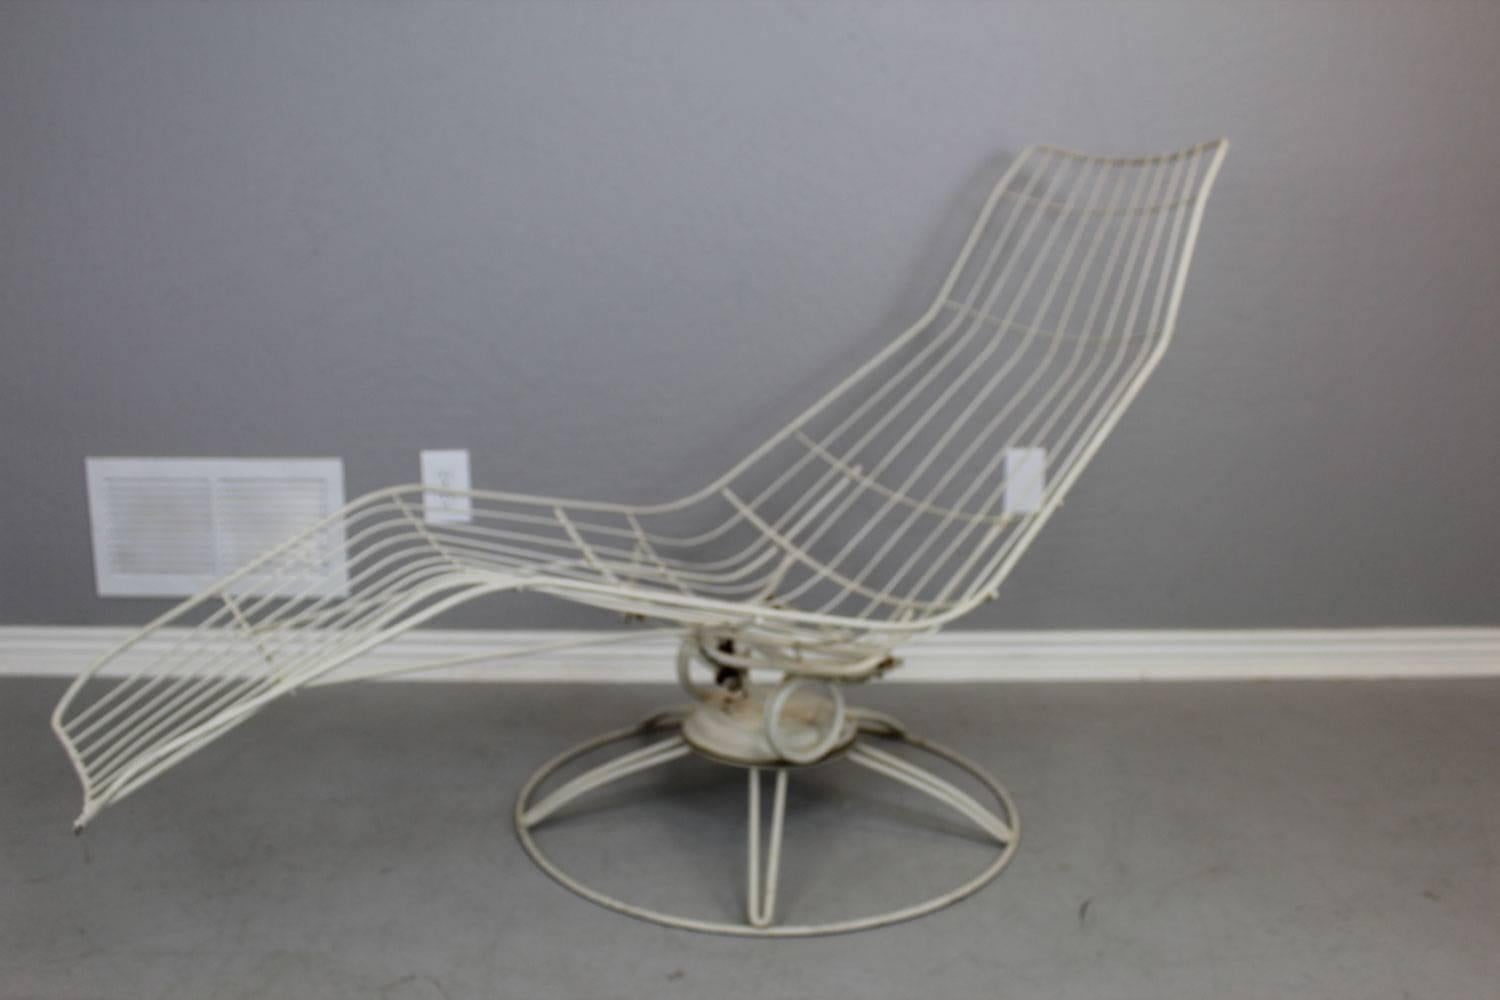 Made by Homecrest in the 1960s, this Banana swivel lounge chair has the HC mark and is in great structural shape. It has the Classic Homecrest springs that are in Fine shape and an adjustable tension base.